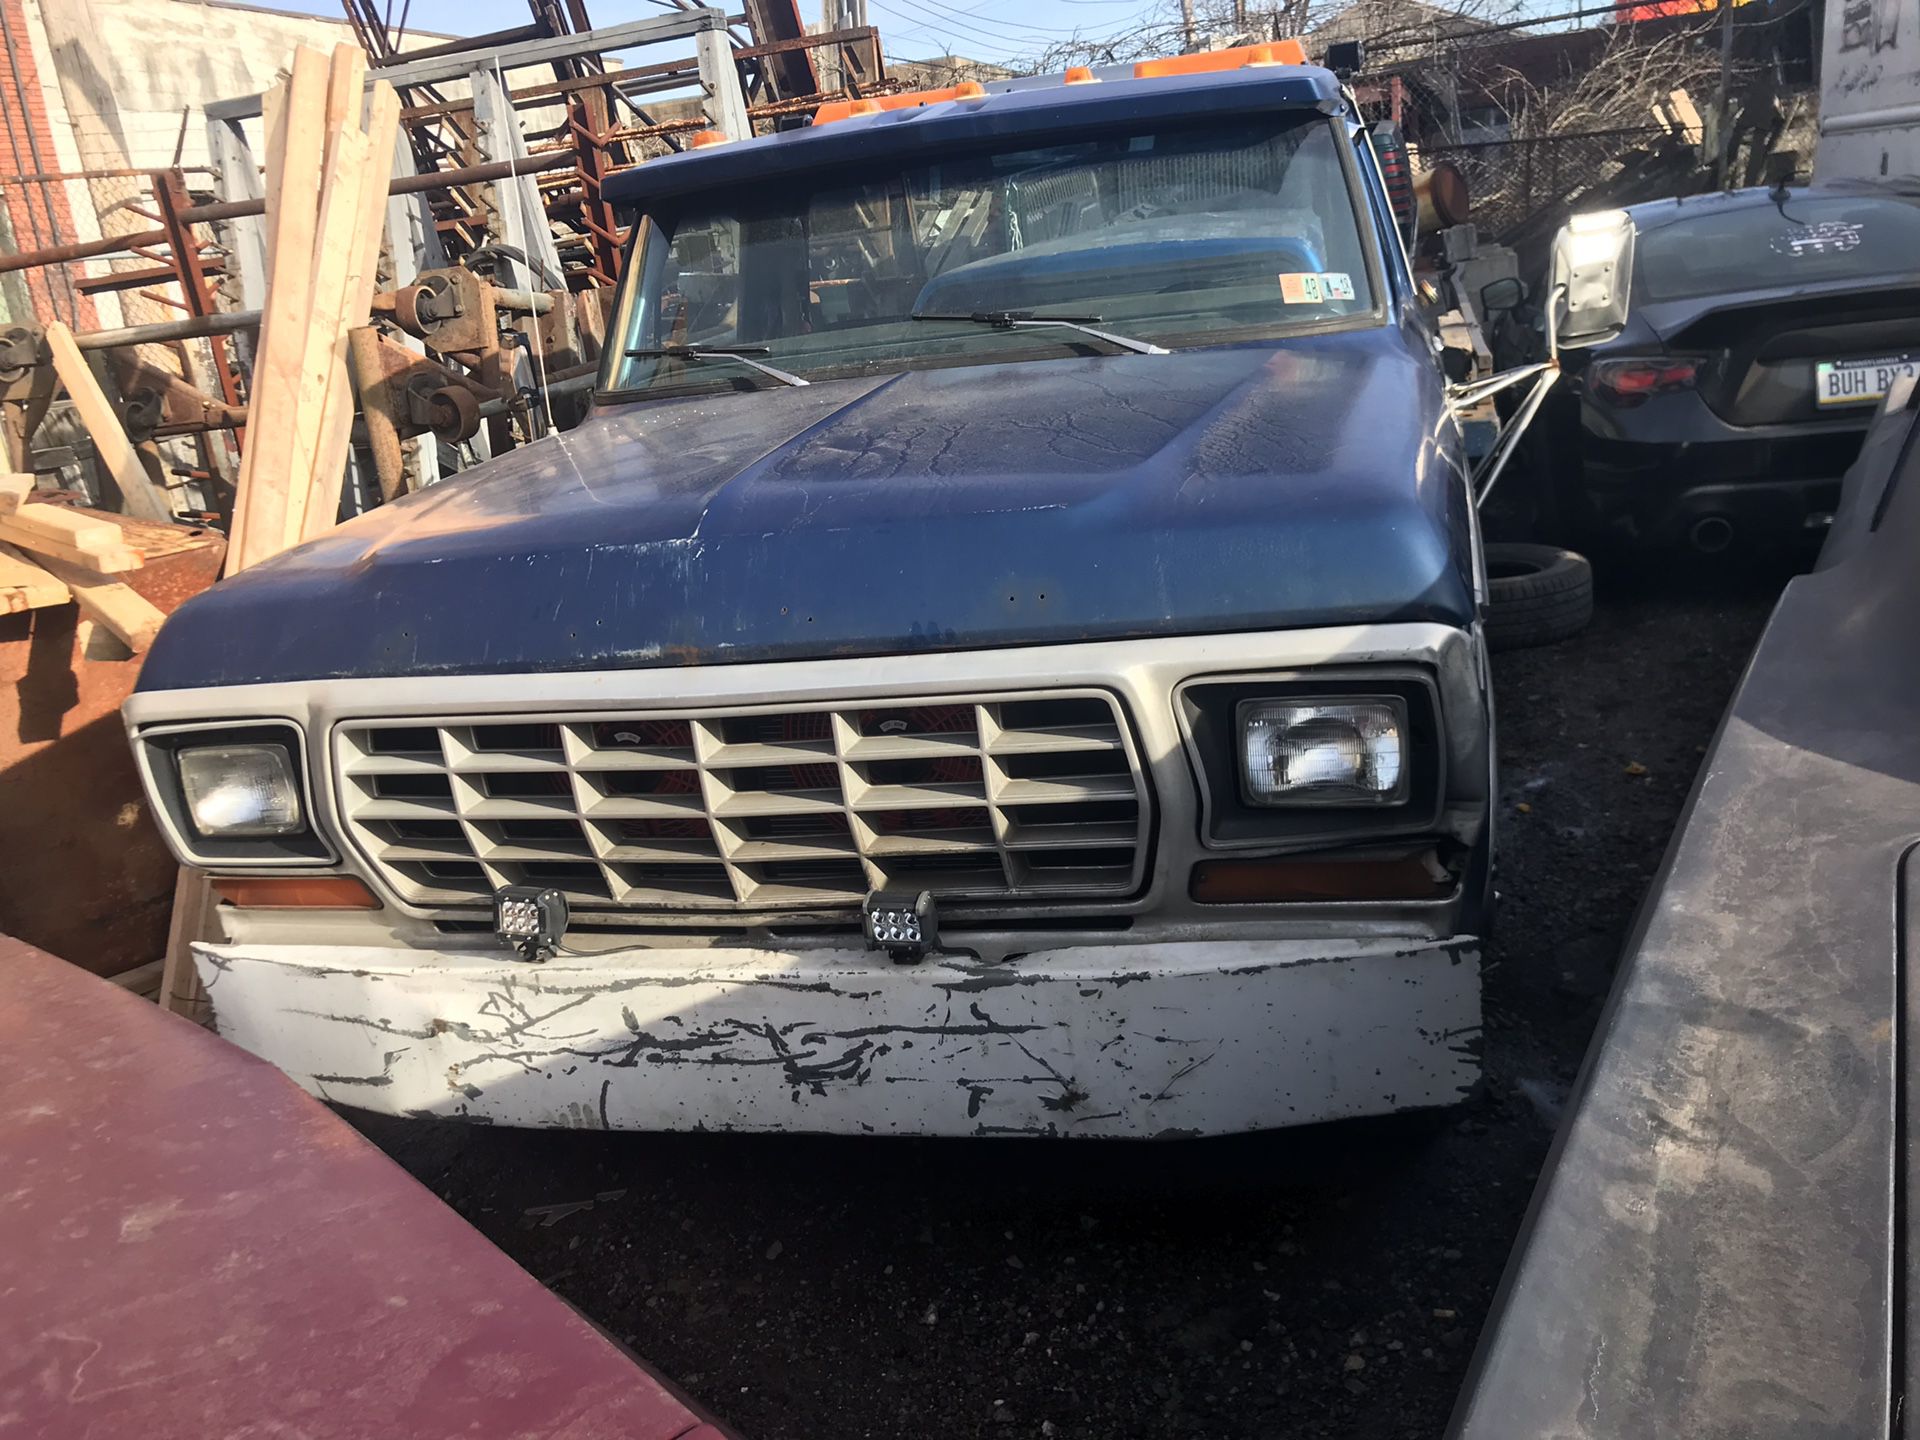 71 ford f 350. Flat bed tow truck. Can take heavy loads. Good. Strong truck